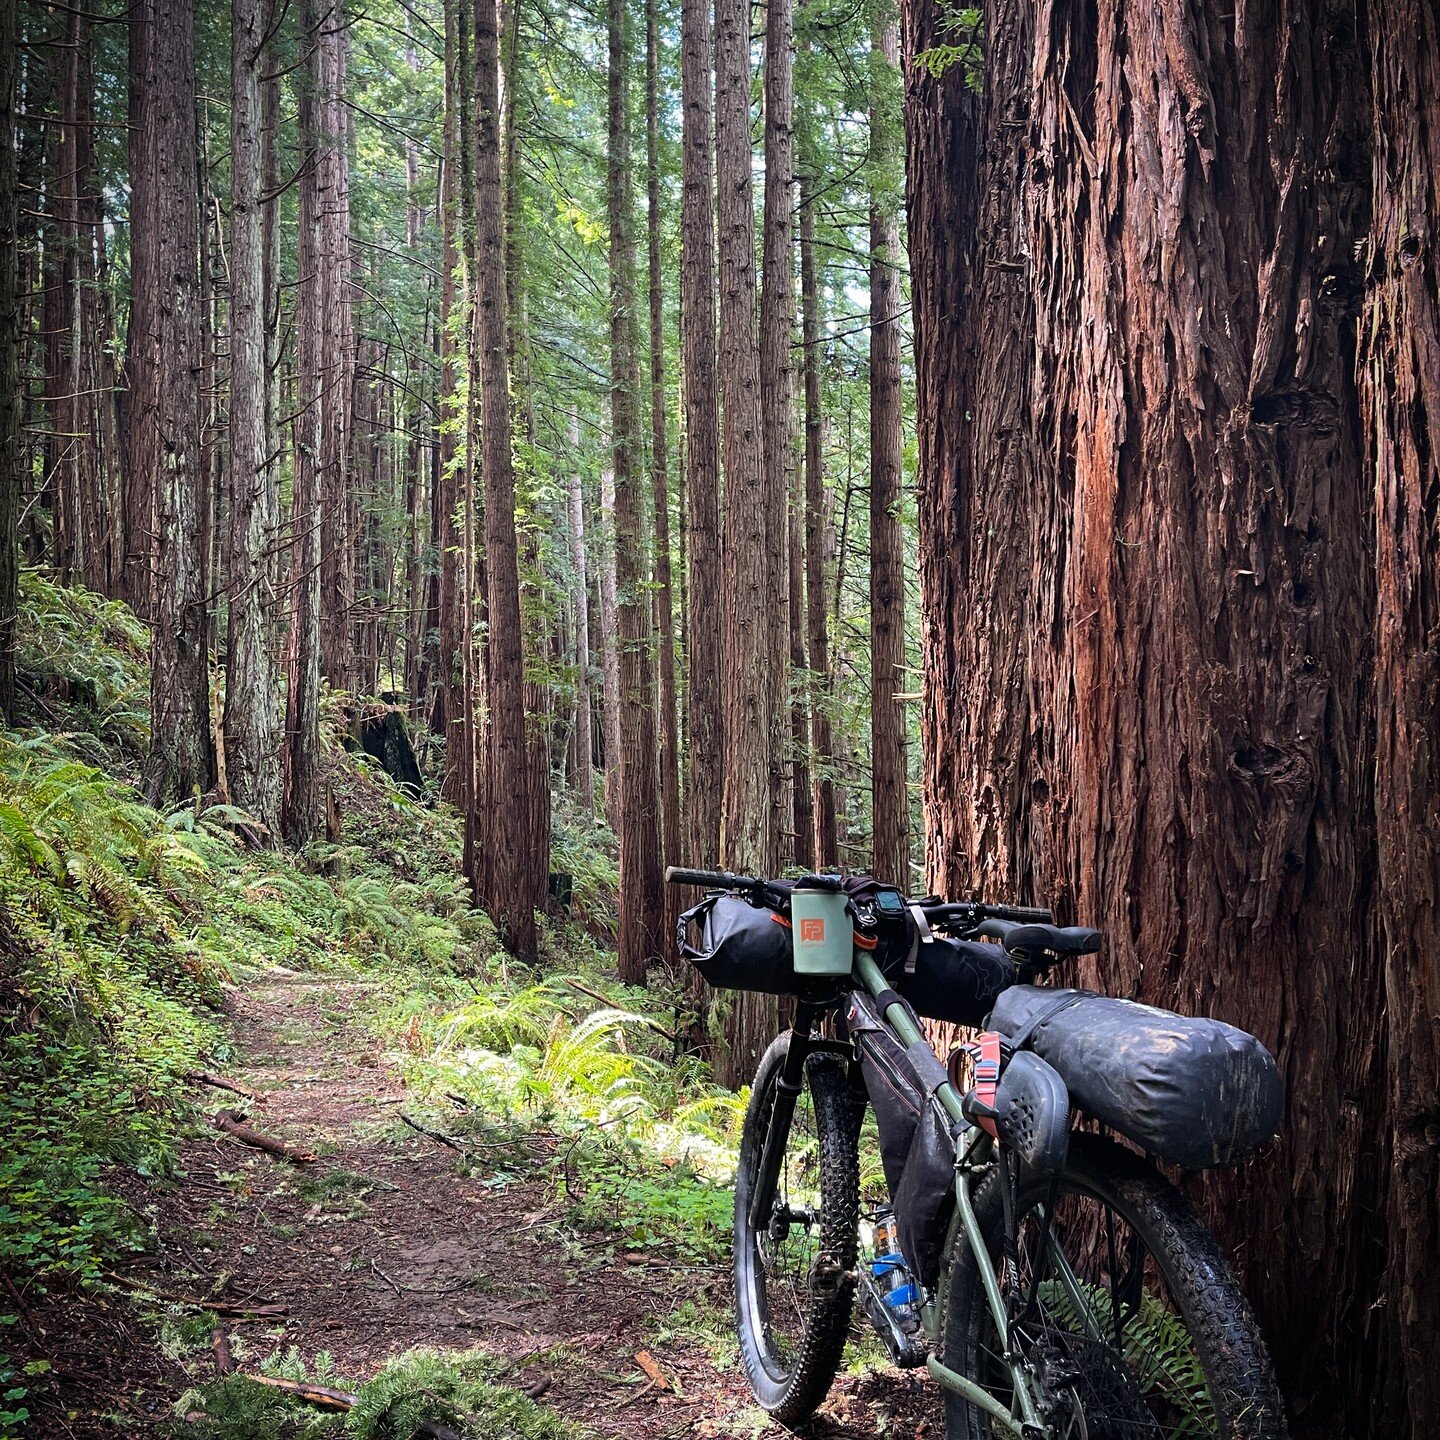 Solo Santa Cruz Mountain Traverse on my Surly.... What an amazing trip!

There is not enough room to fit it all in with one post..... but this might sum it up....

3 days, 110 miles, 15,000 feet of climbing, 90 percent dirt, 60 percent singletrack. 
